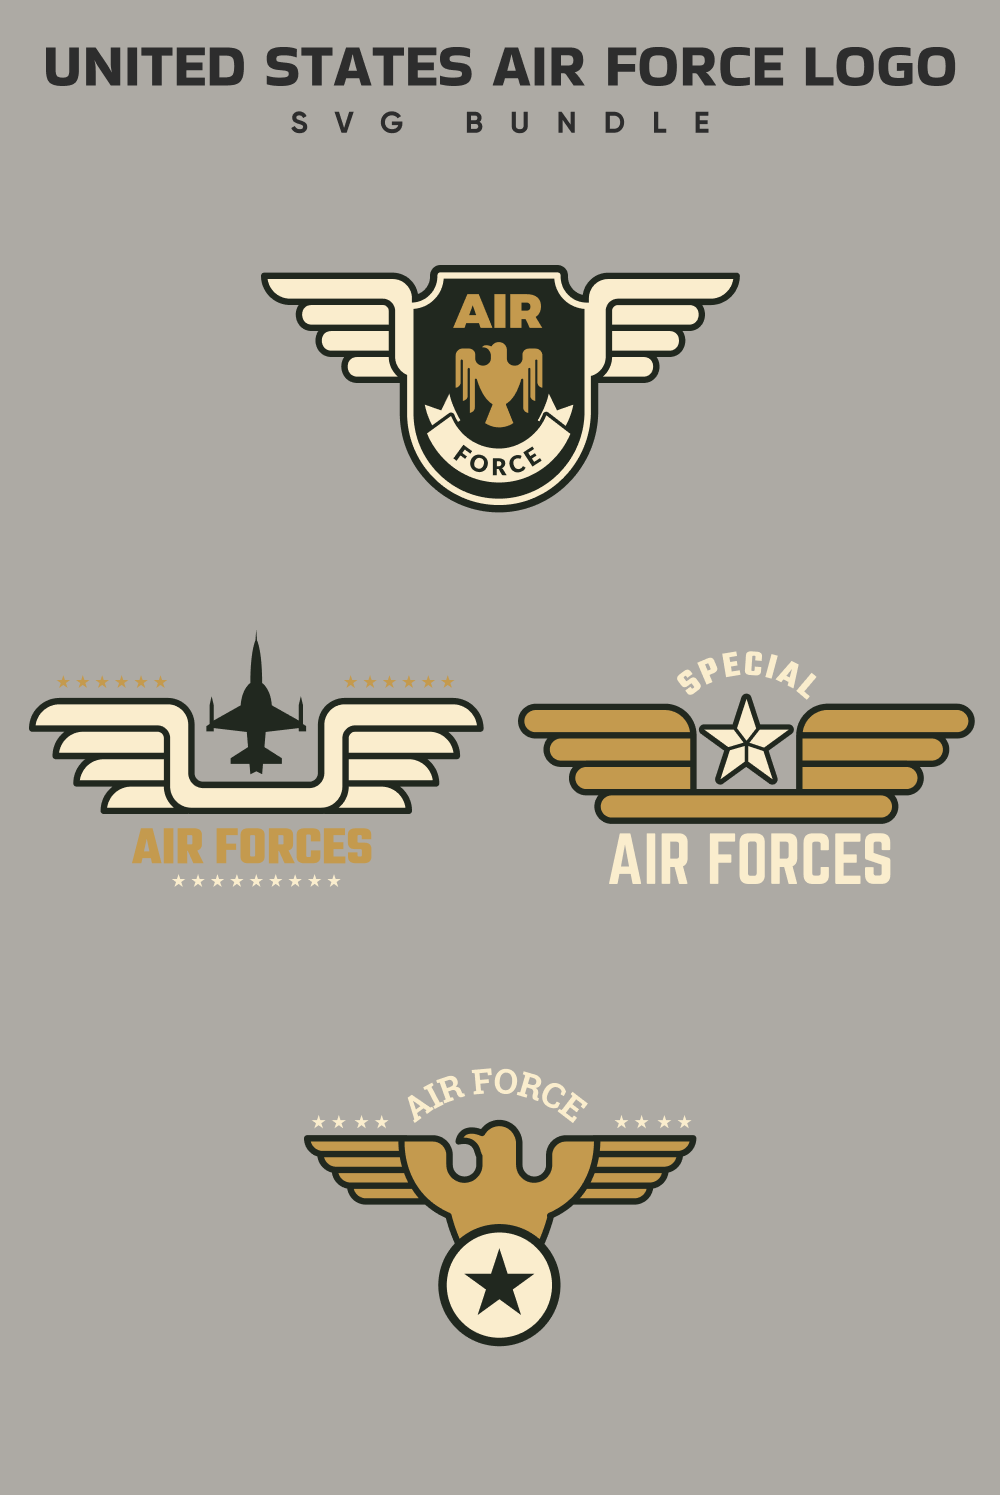 Cool united states air force logos.